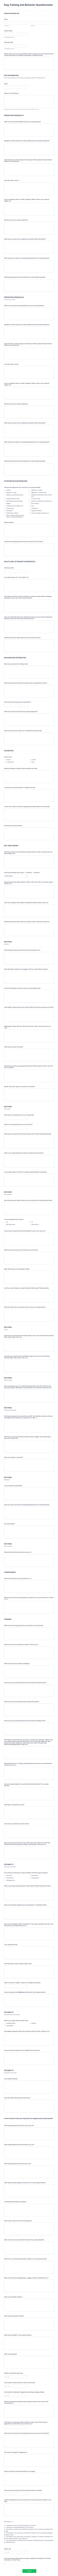 Dog Training And Behavior Questionnaire Form Template